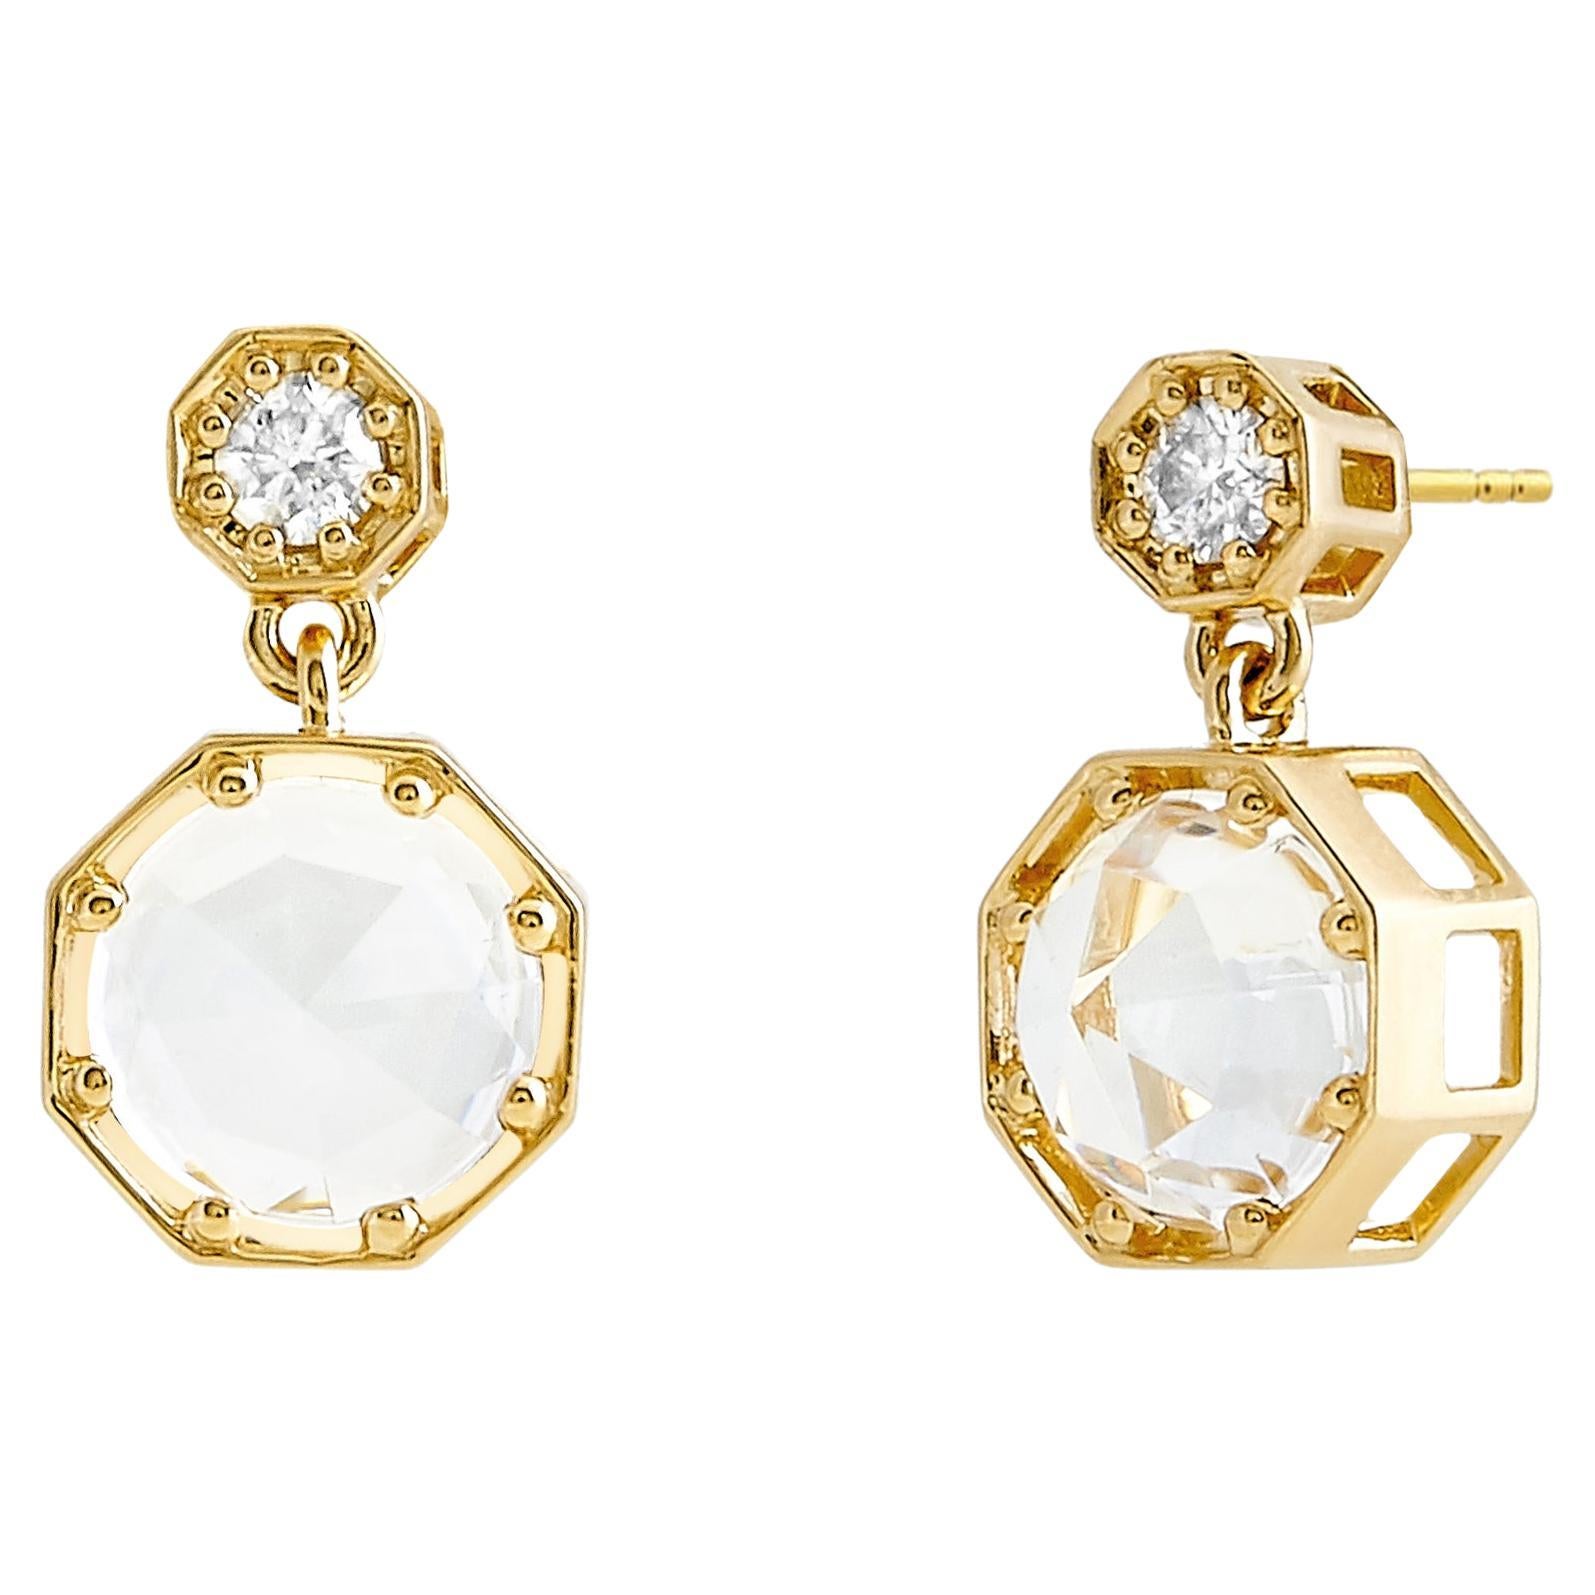 Syna Yellow Gold Octa Rock Crystal Earrings with Diamonds For Sale